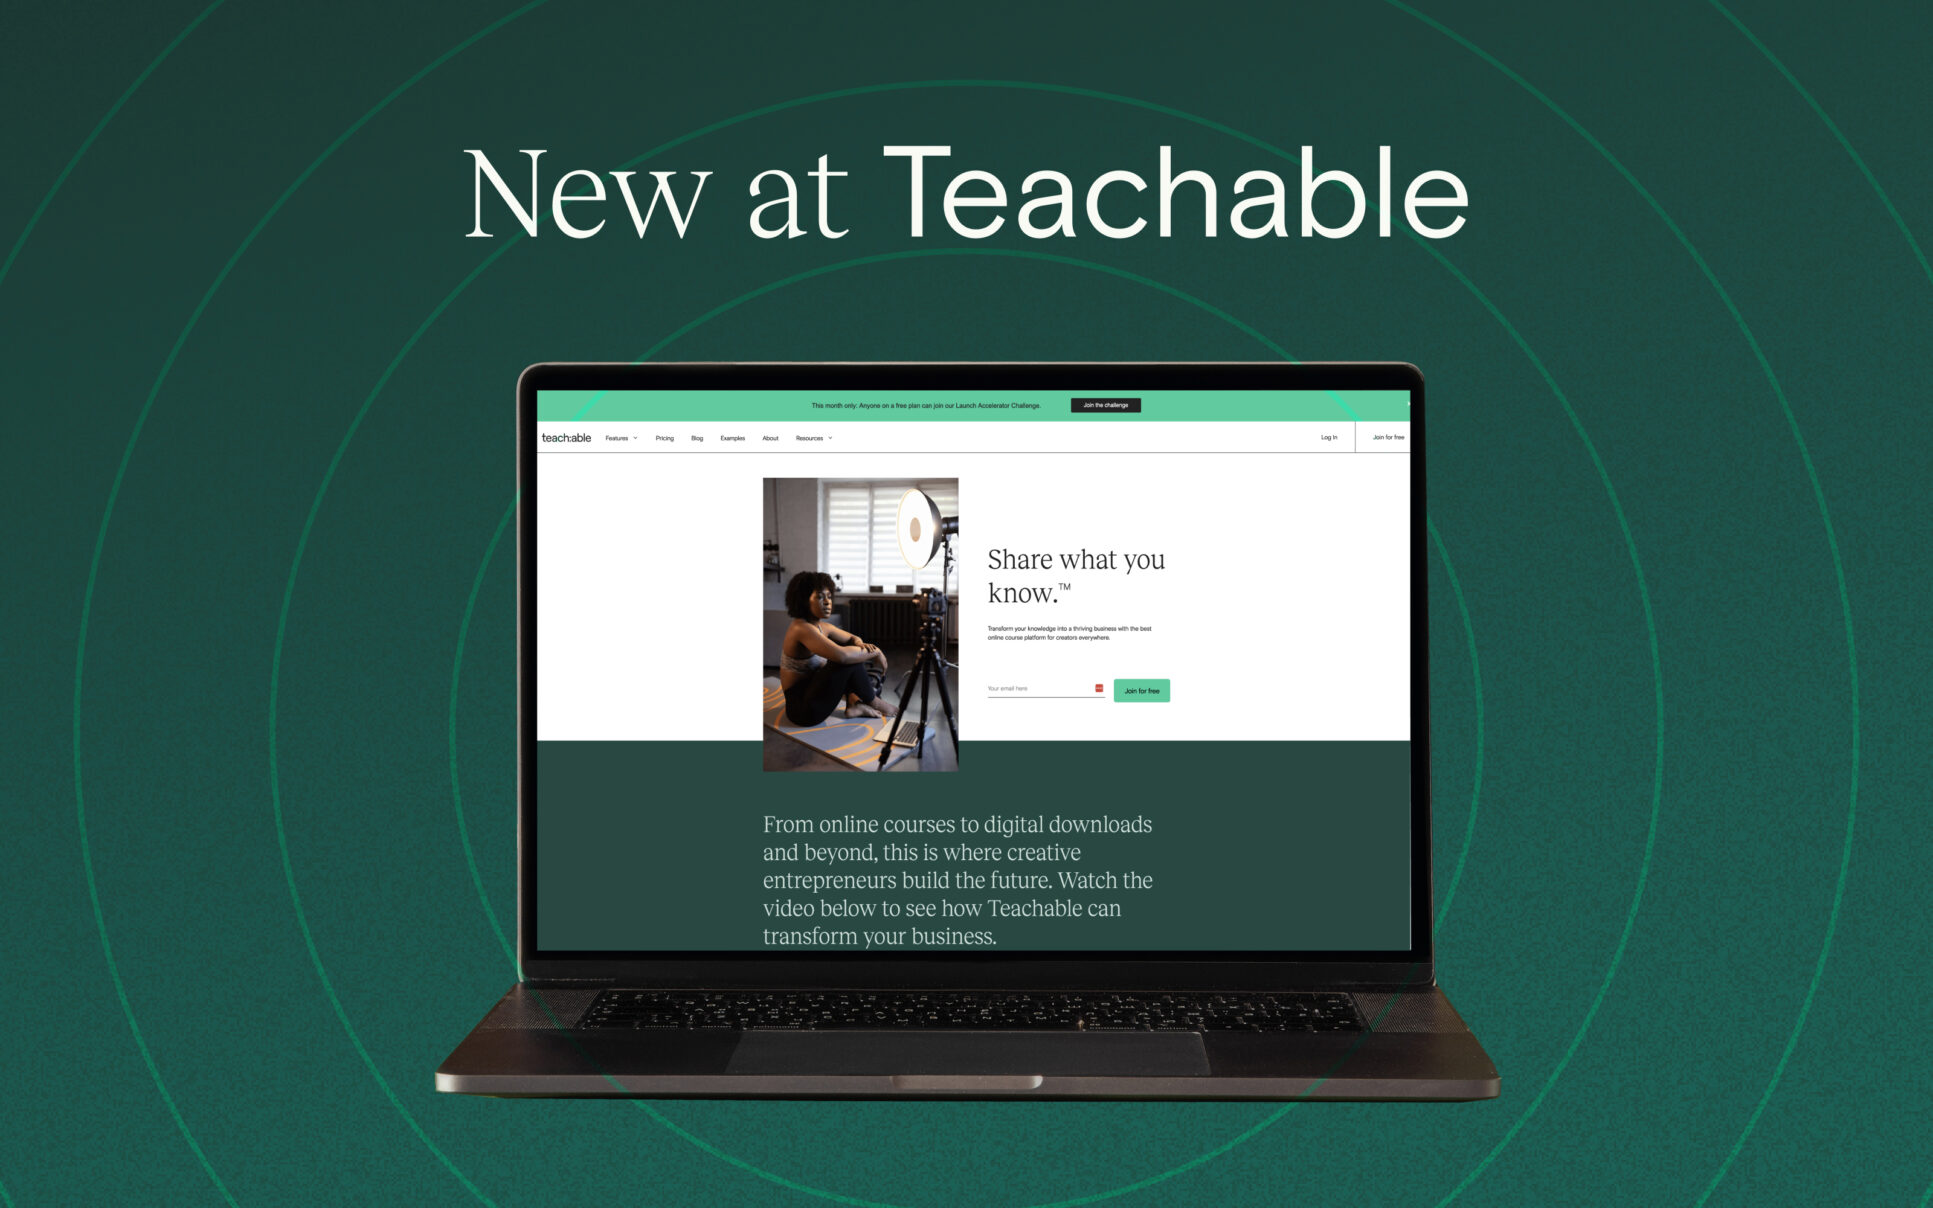 Teachable products and features launches